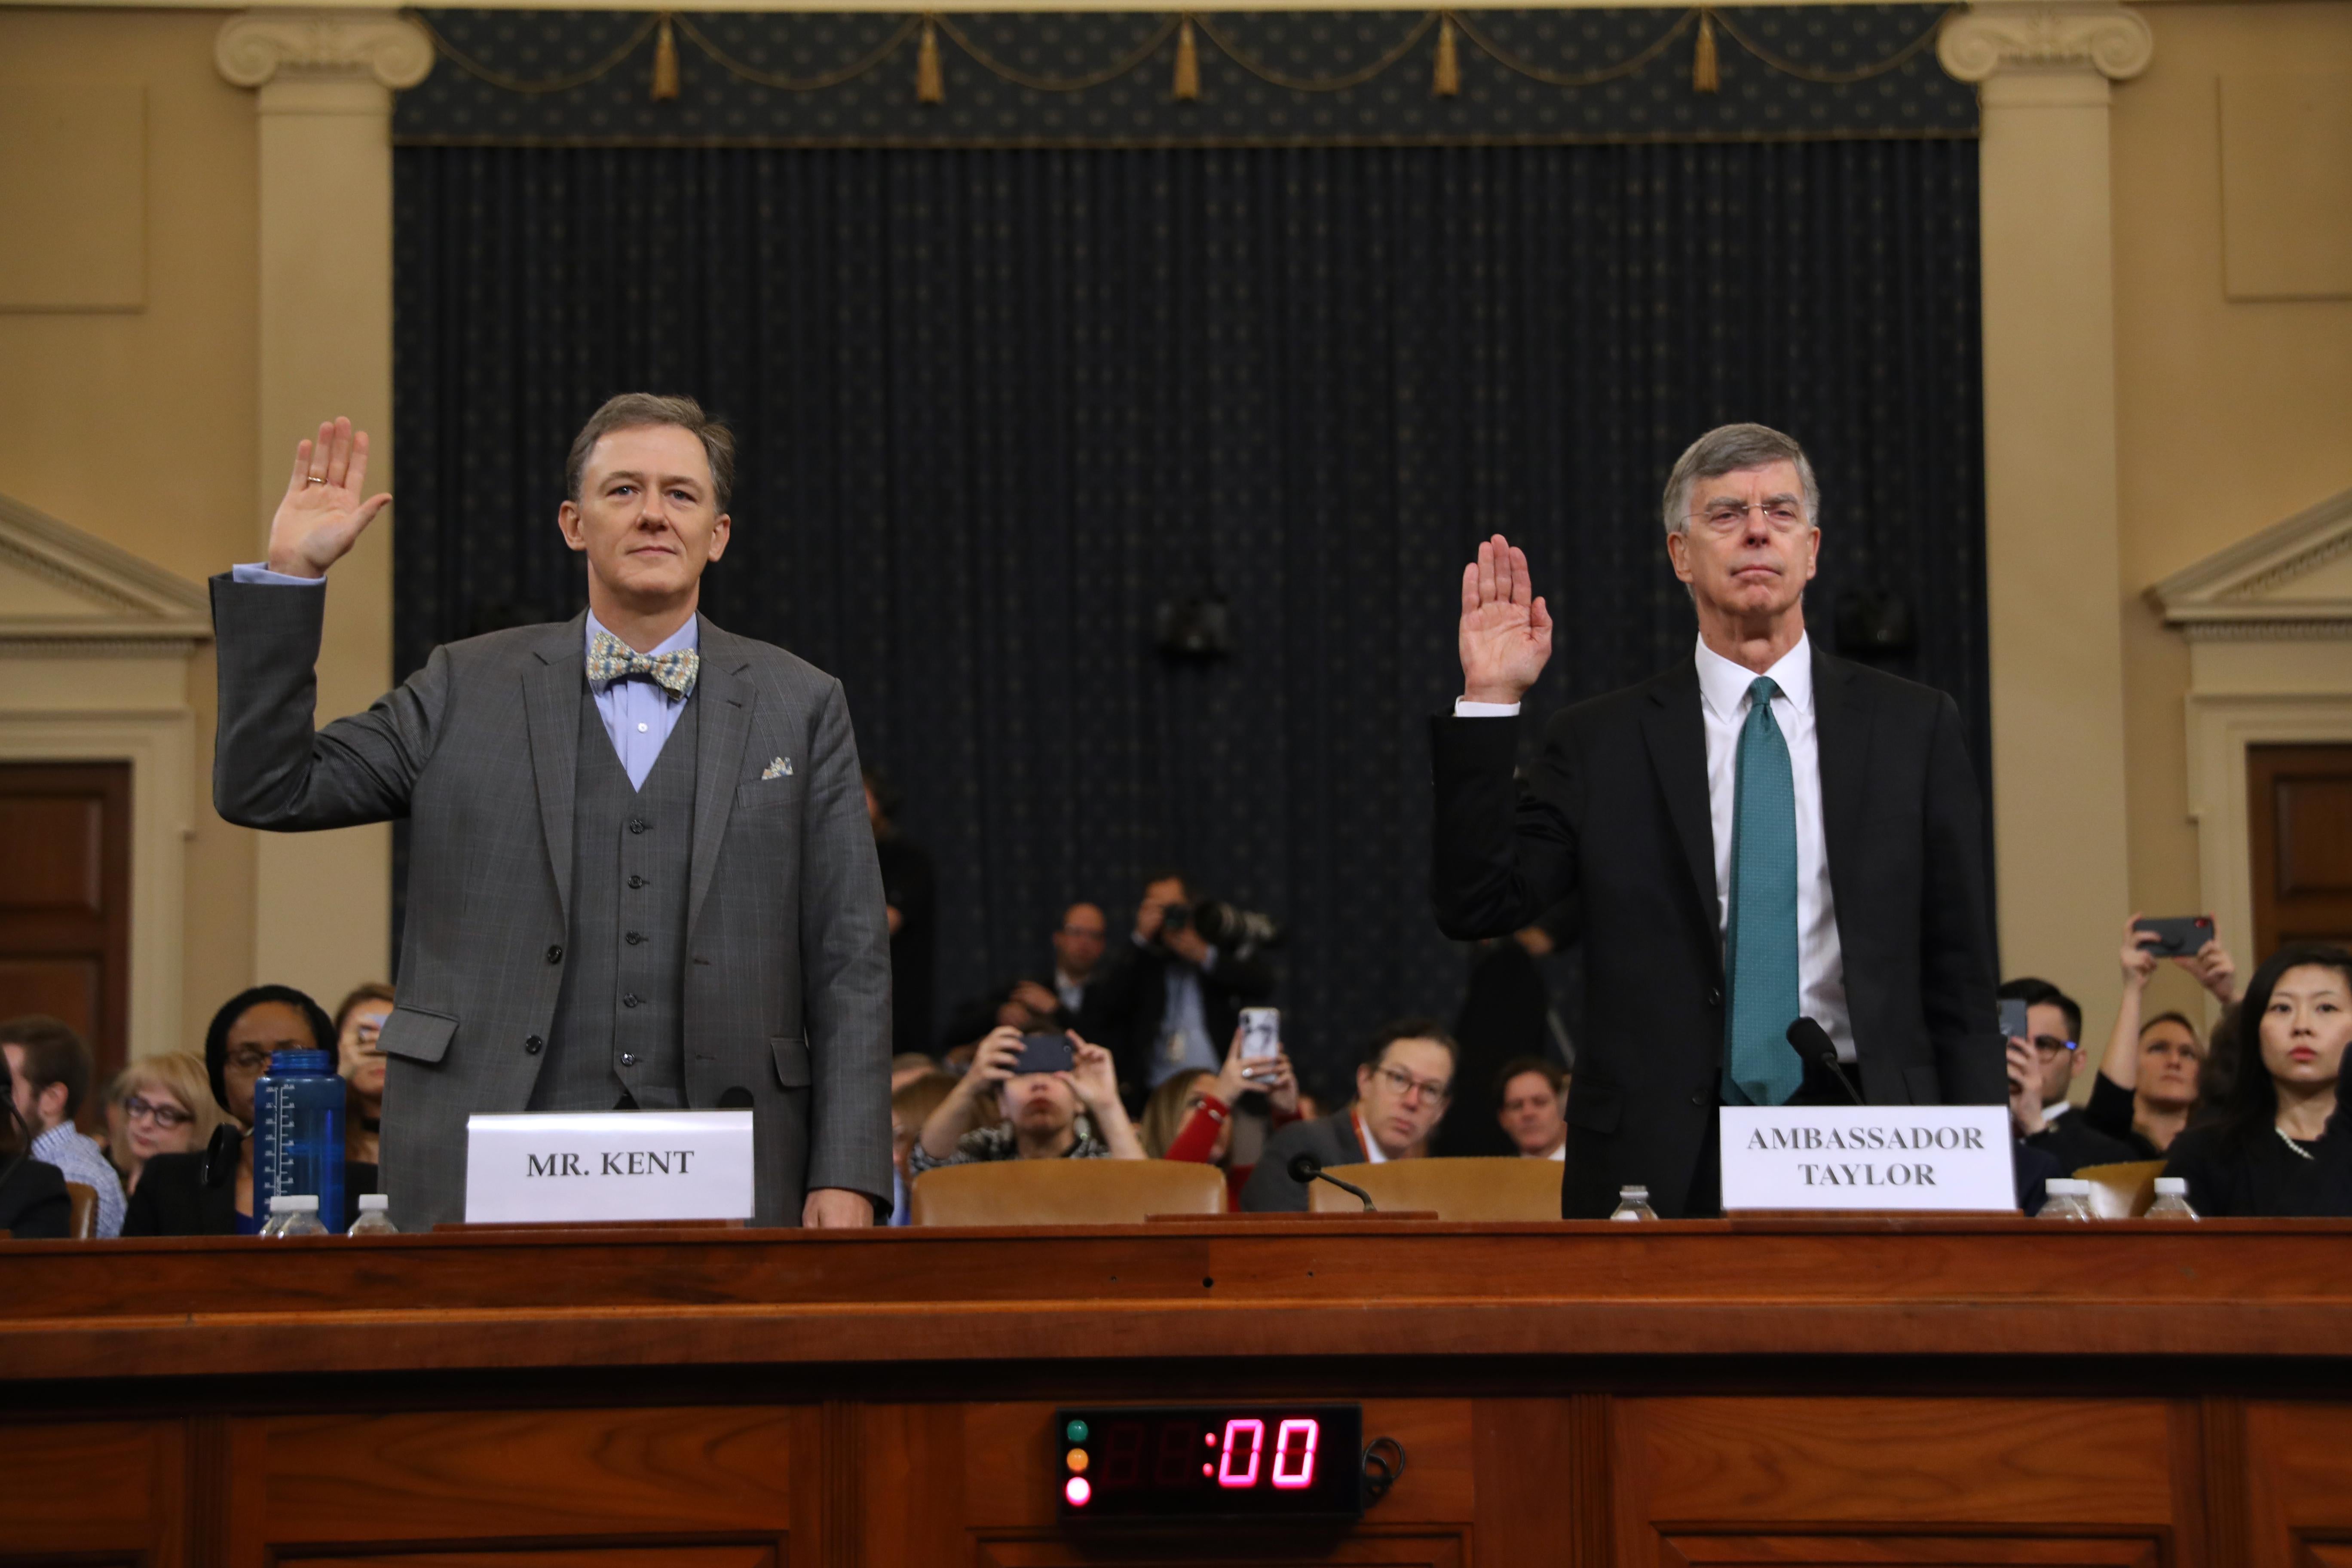 George Kent and Bill Taylor raise their hands as they are sworn in.